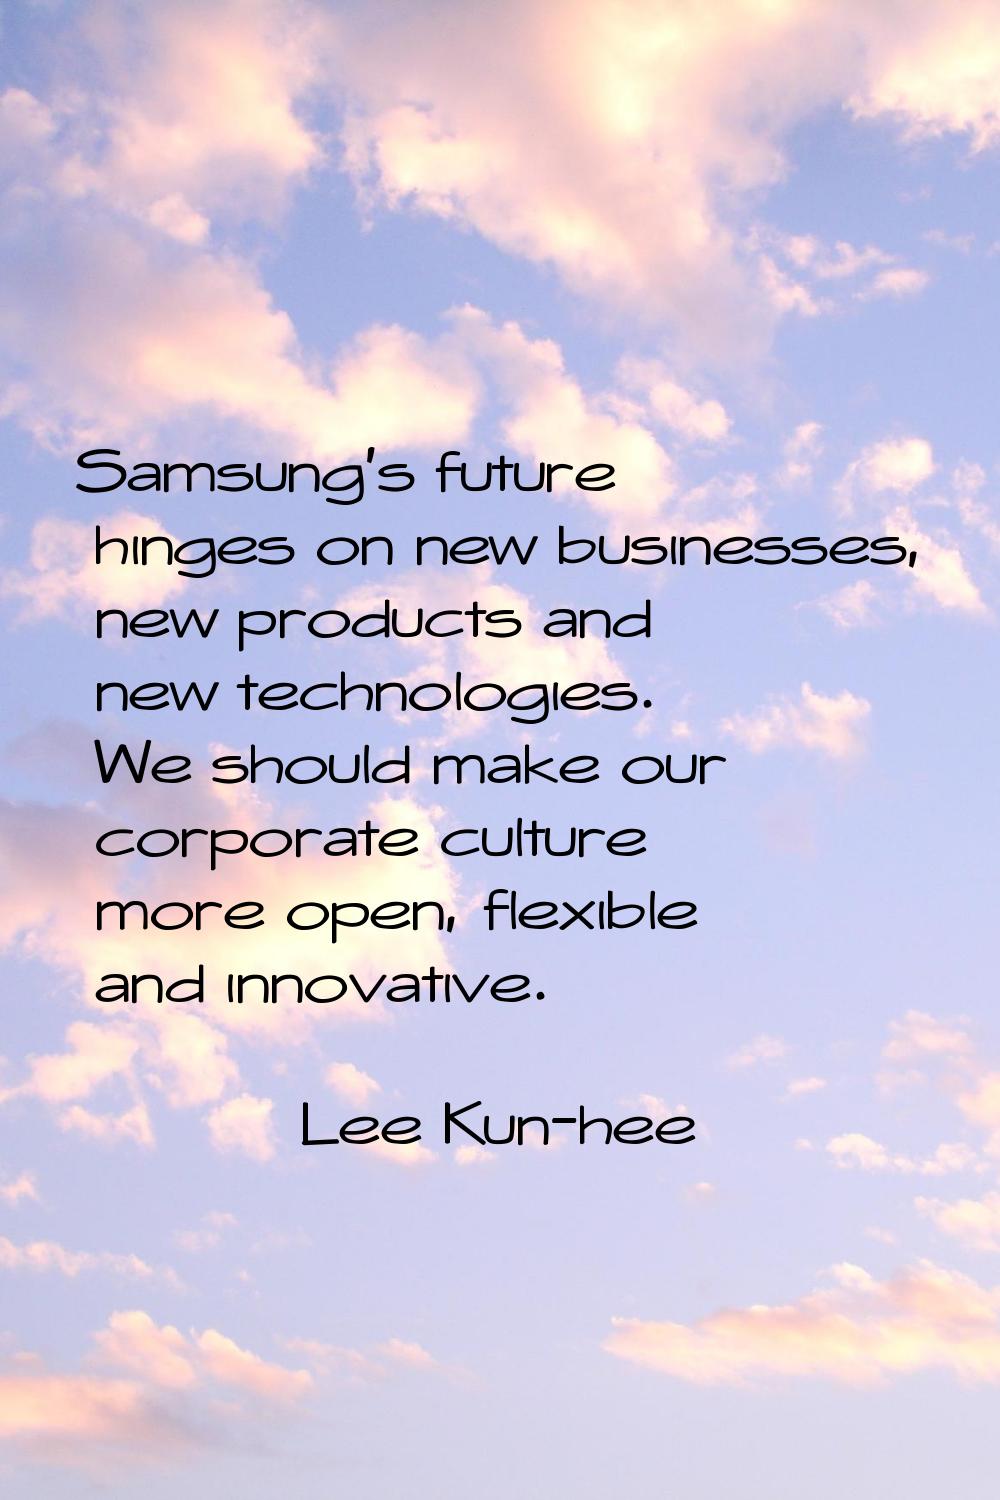 Samsung's future hinges on new businesses, new products and new technologies. We should make our co